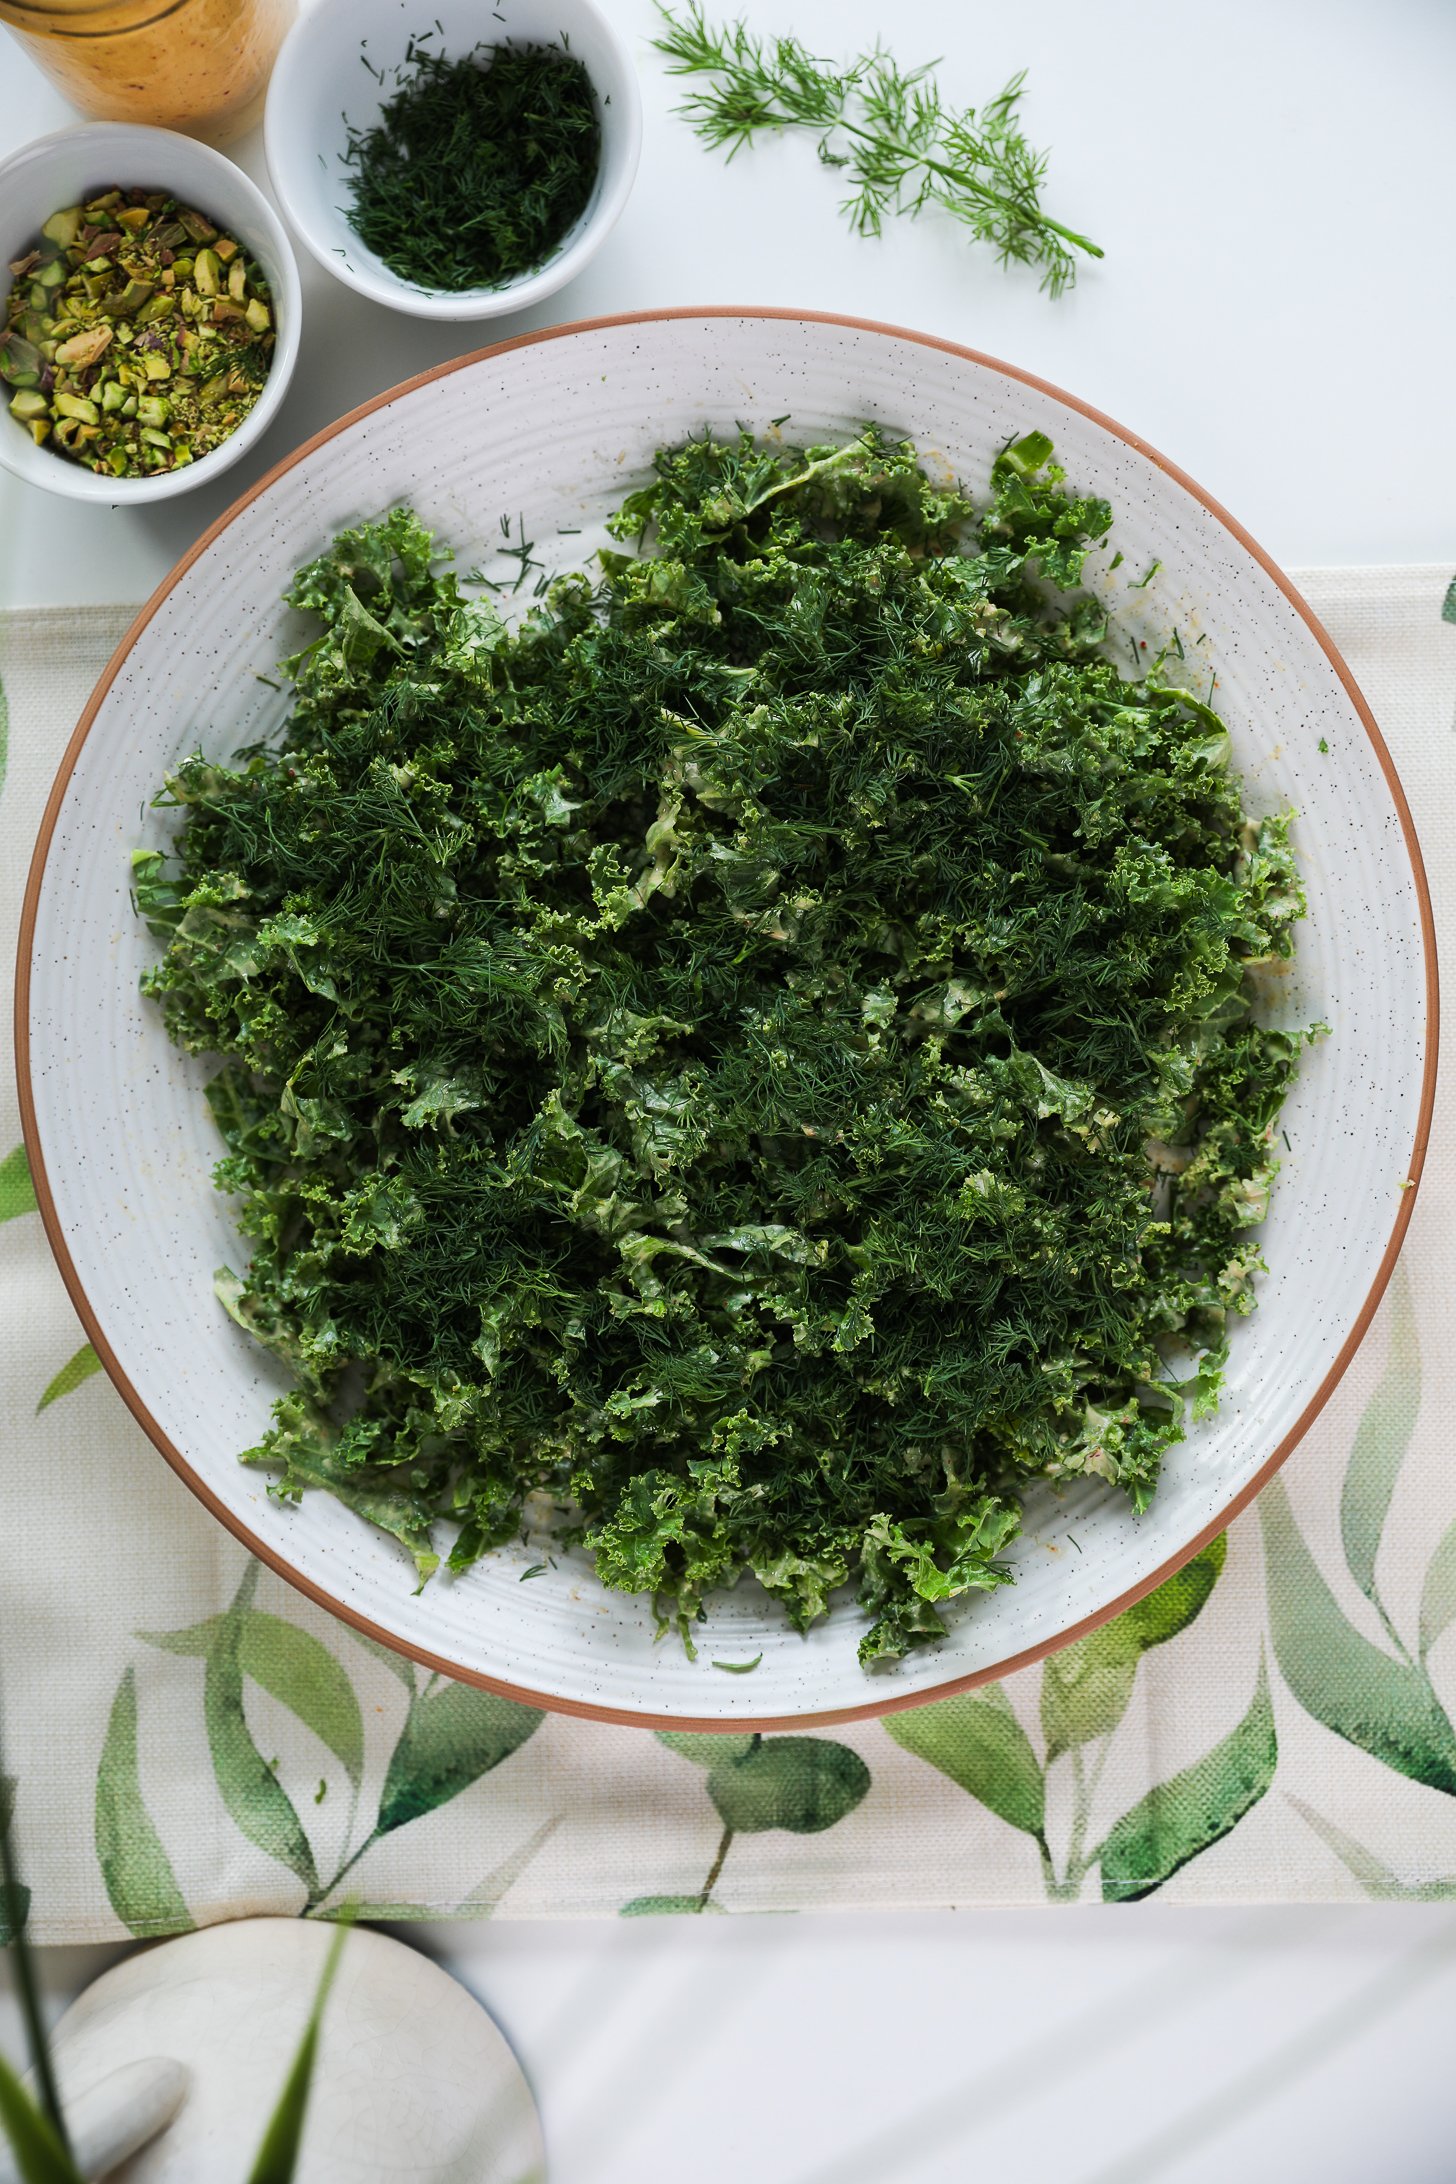 A large plate of chopped kale topped with fresh dill on a runner with ramekins of nuts and herbs nearby.